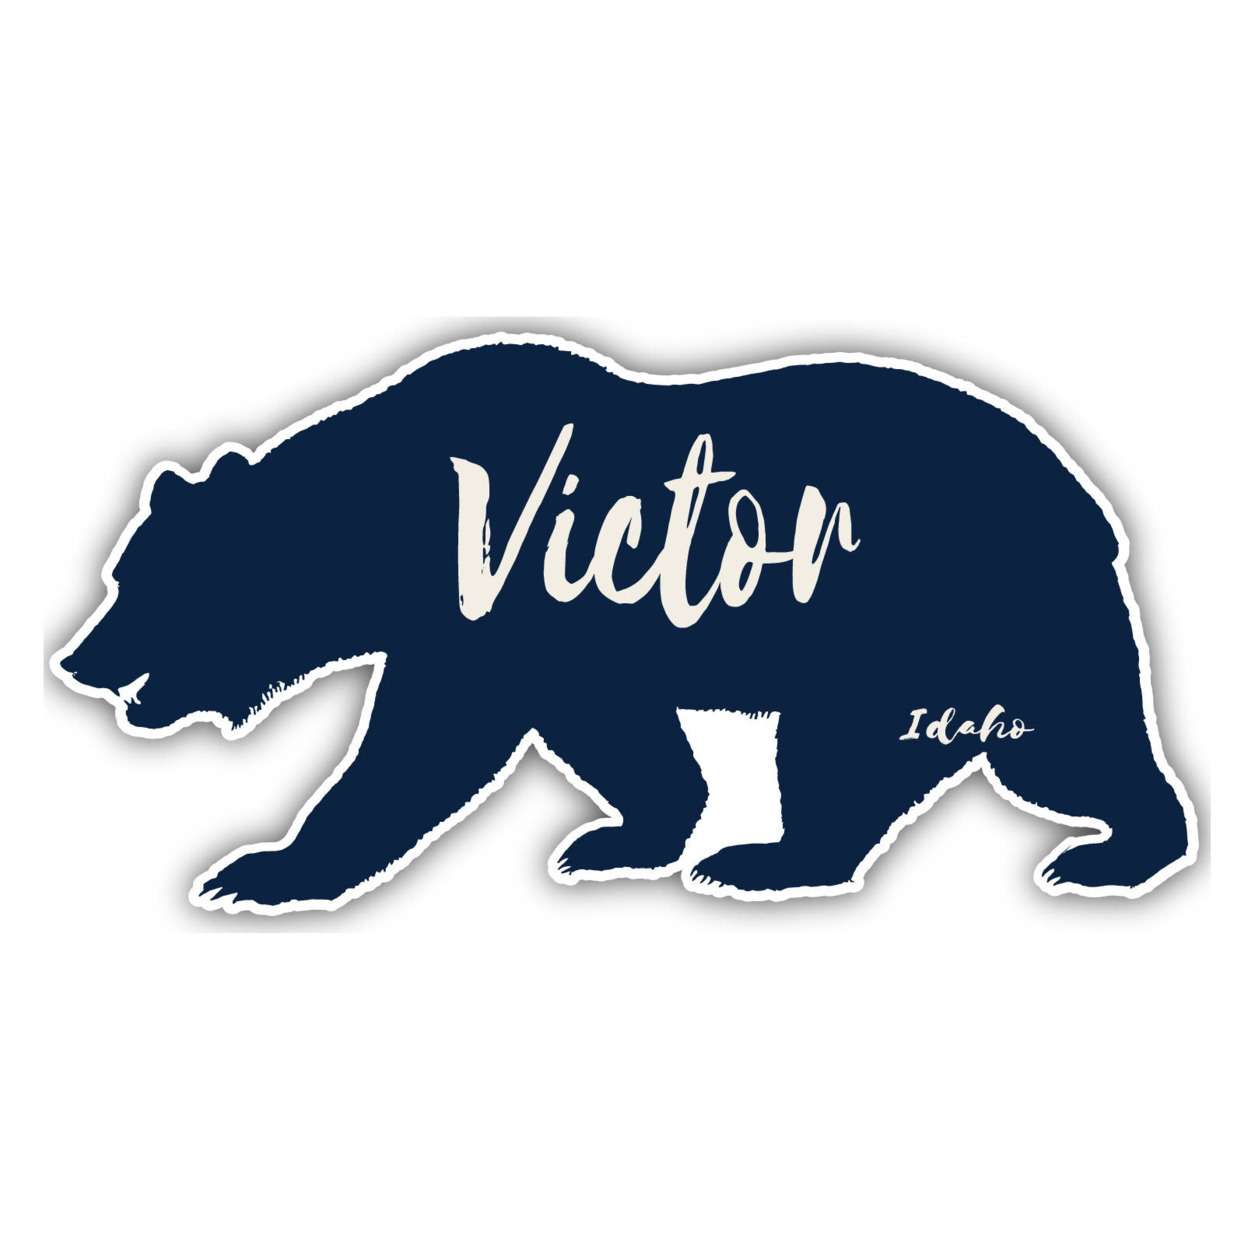 Victor Idaho Souvenir Decorative Stickers (Choose Theme And Size) - Single Unit, 4-Inch, Great Outdoors